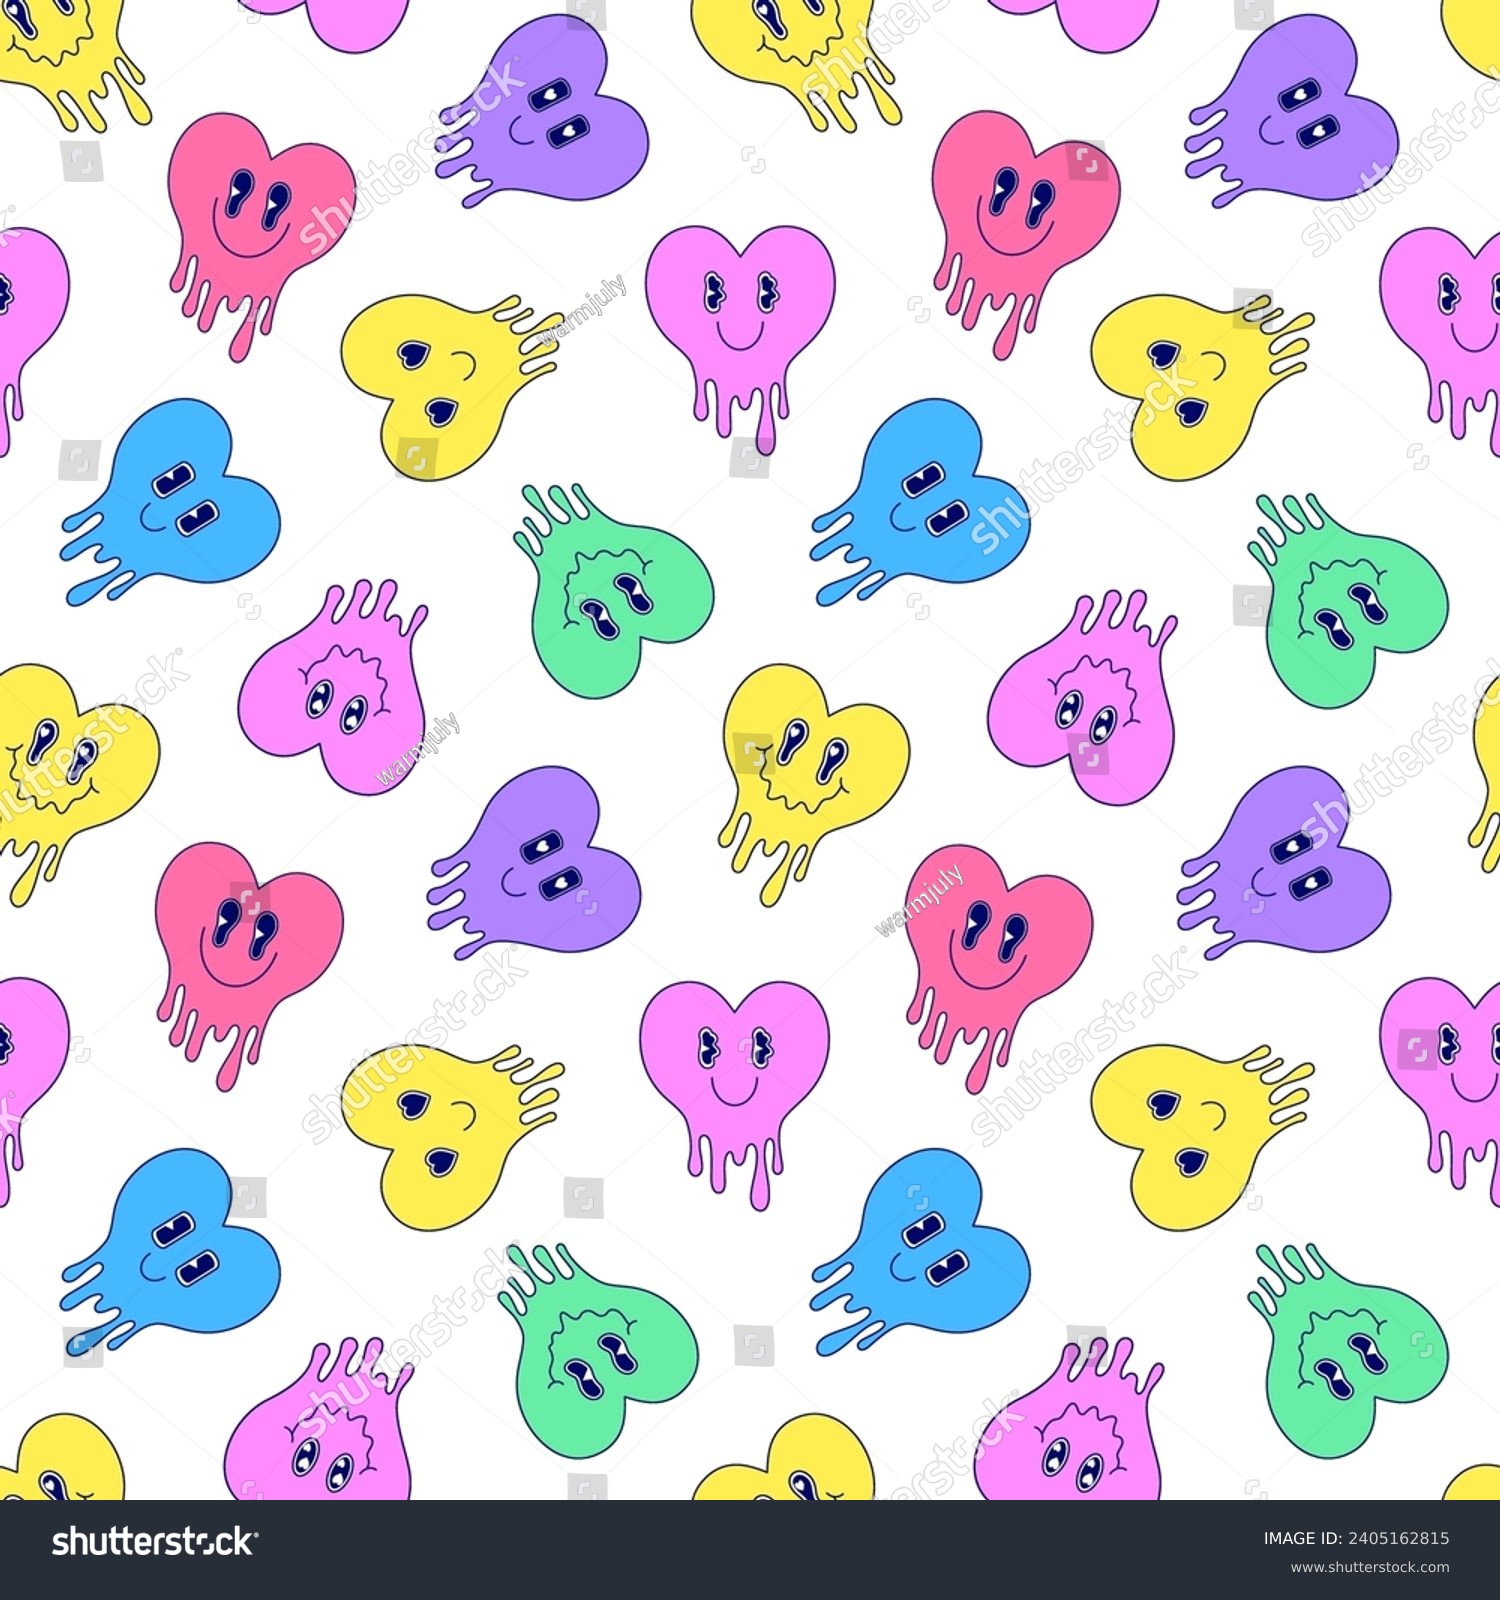 SVG of Seamless pattern with melting hearts in cartoon style on white background. svg